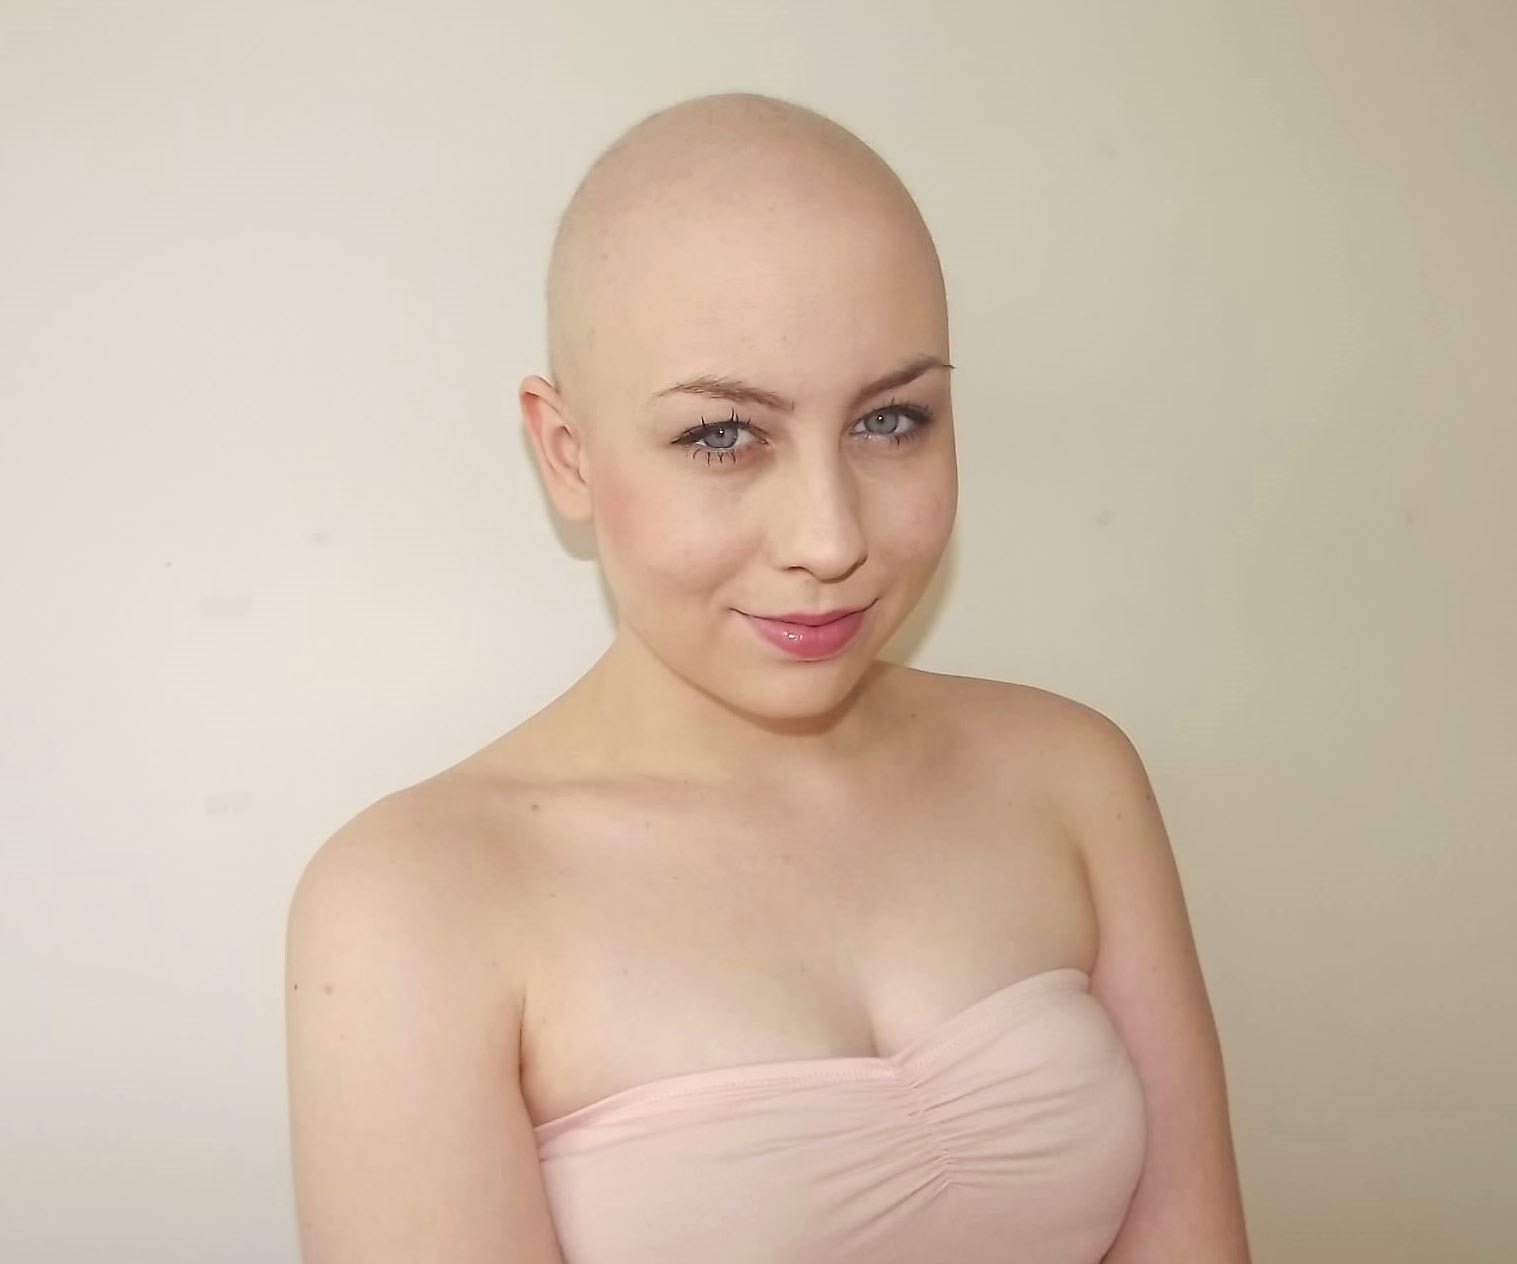 I’m 23 and have had ovarian cancer twice